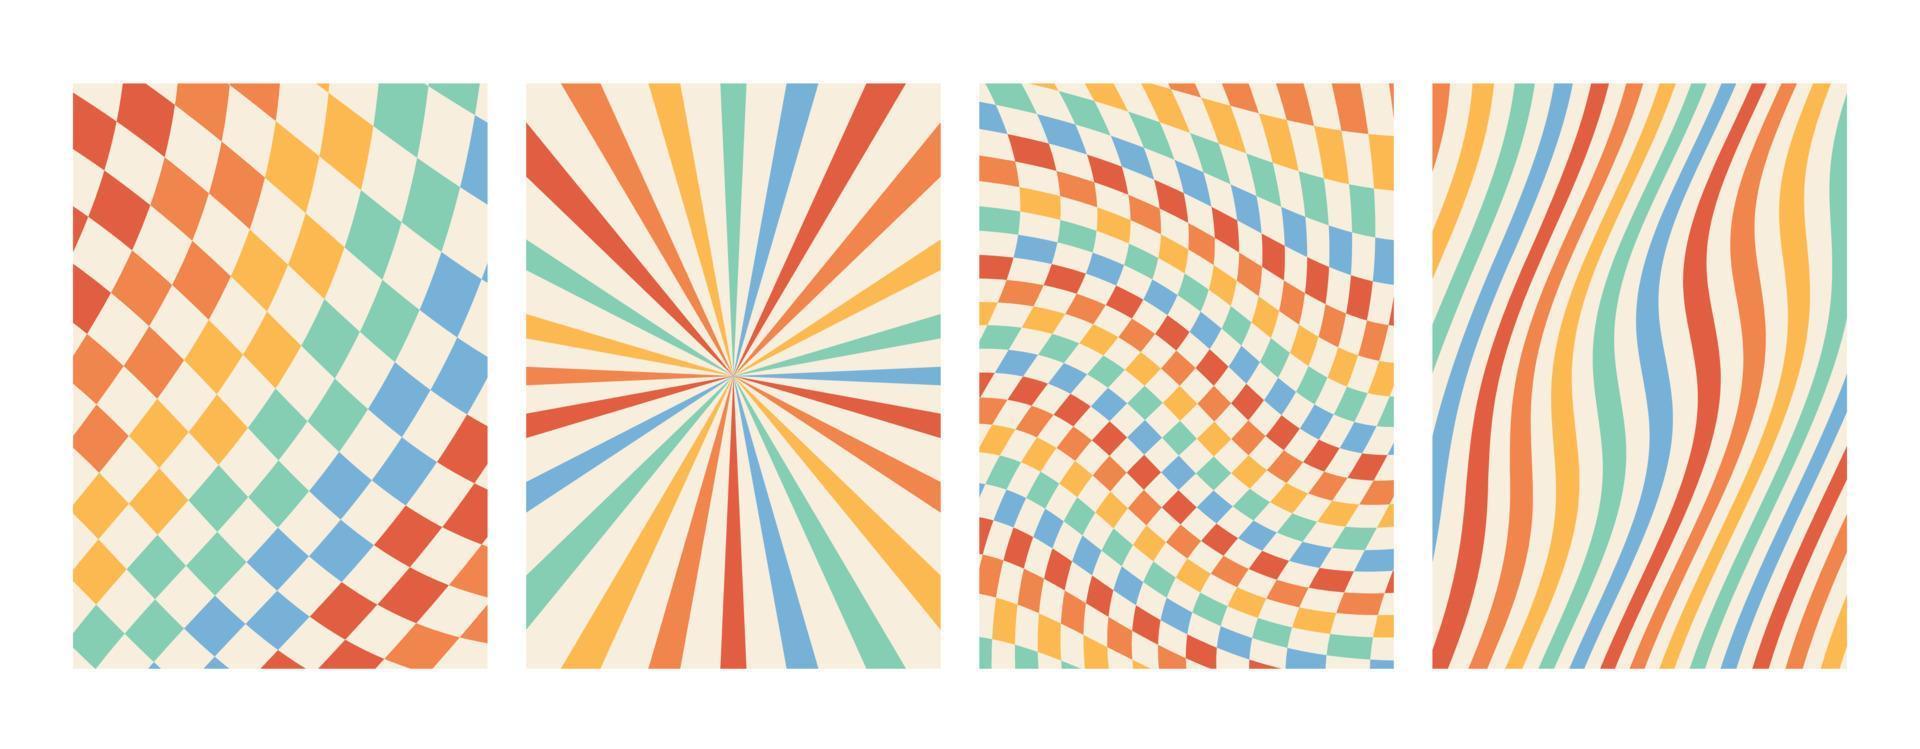 Groovy rainbow backgrounds. Chessboard, grid, waves, swirl, twirl pattern.. Twisted and distorted vector texture in a trendy retro psychedelic style. The aesthetics of the hippies of the 70s.